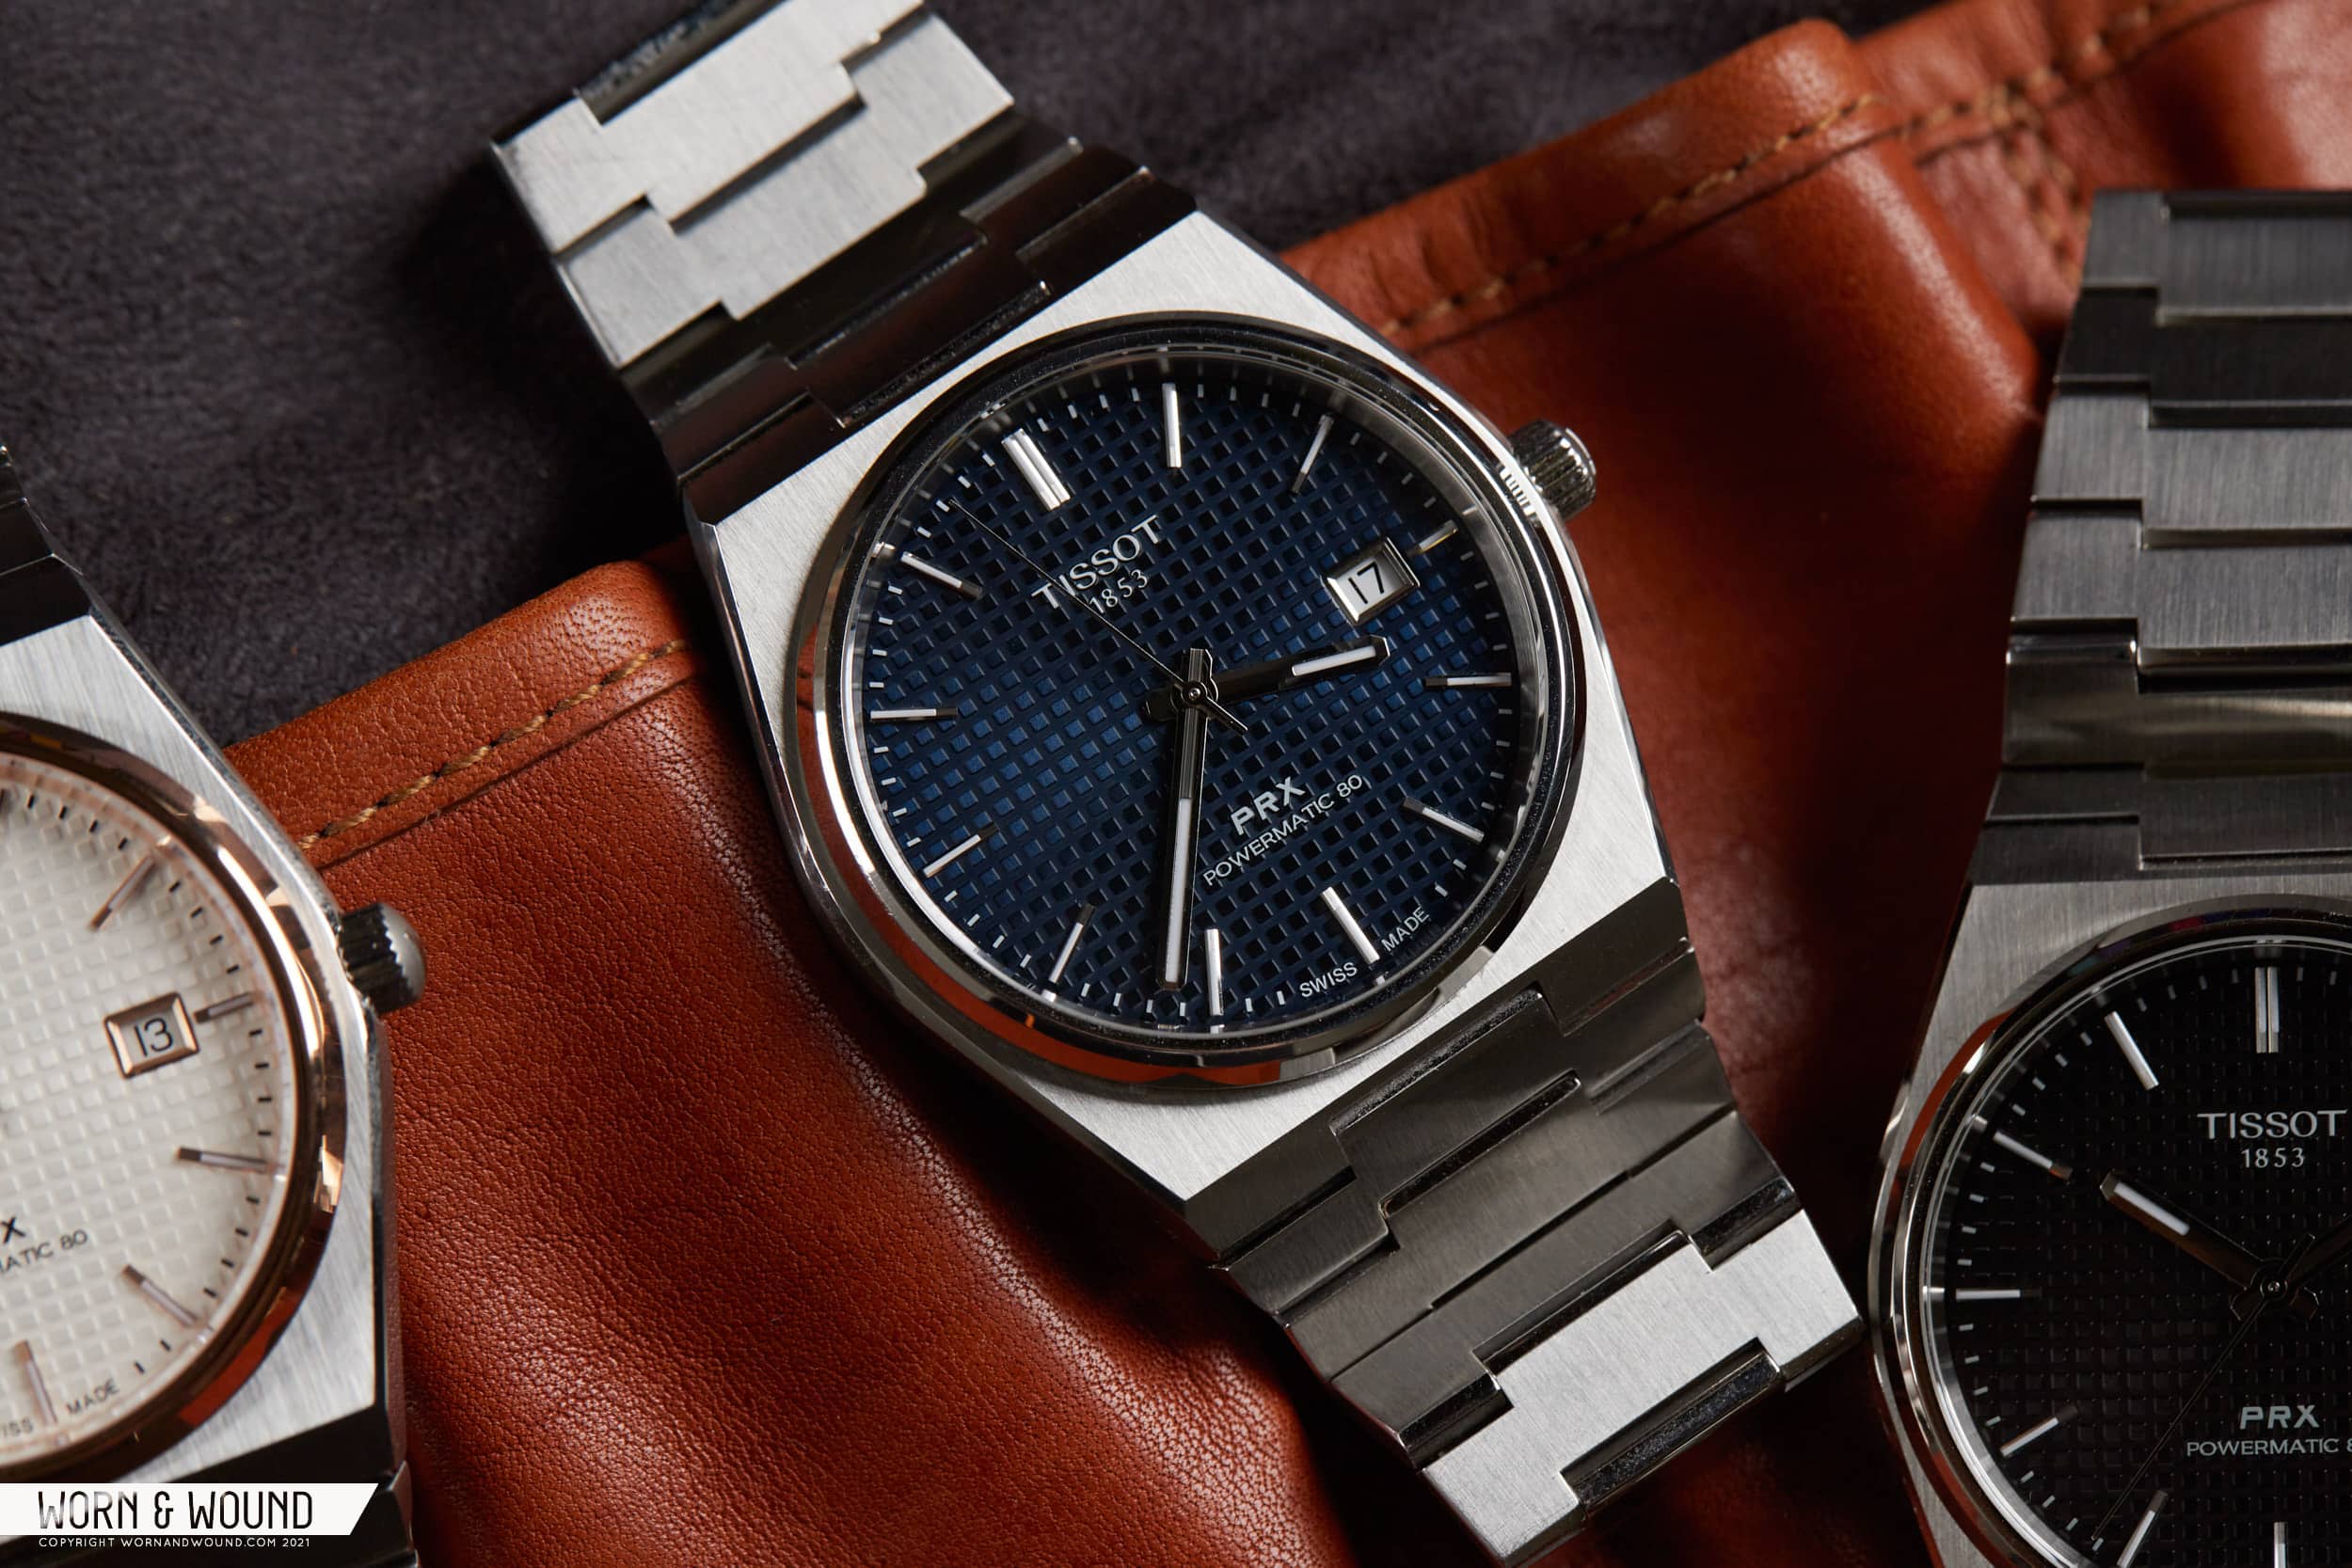 Hands-On With The Funky Tissot PRX Powermatic 80 - Worn & Wound